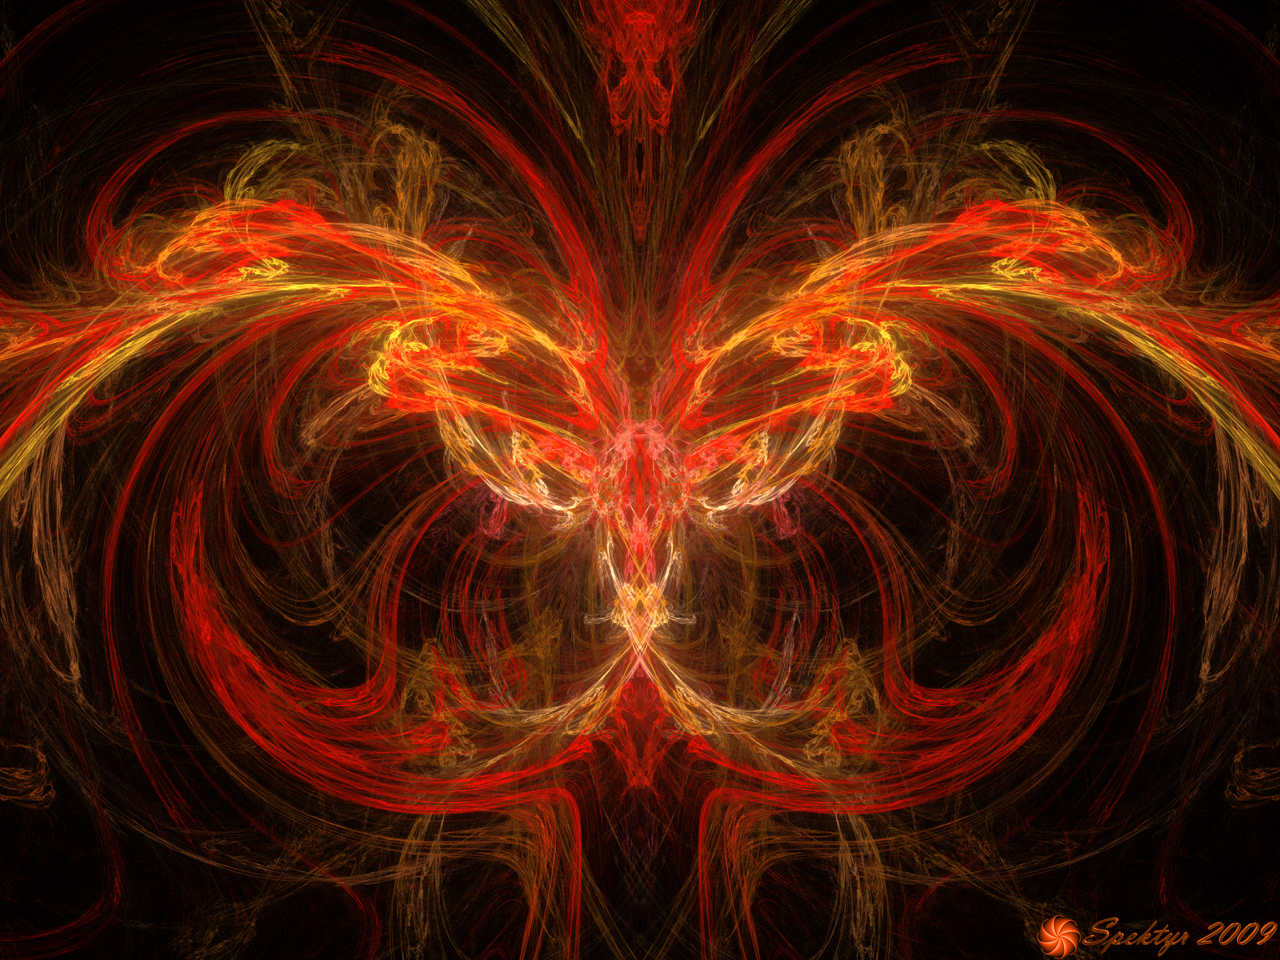 The Red Phoenix Rising